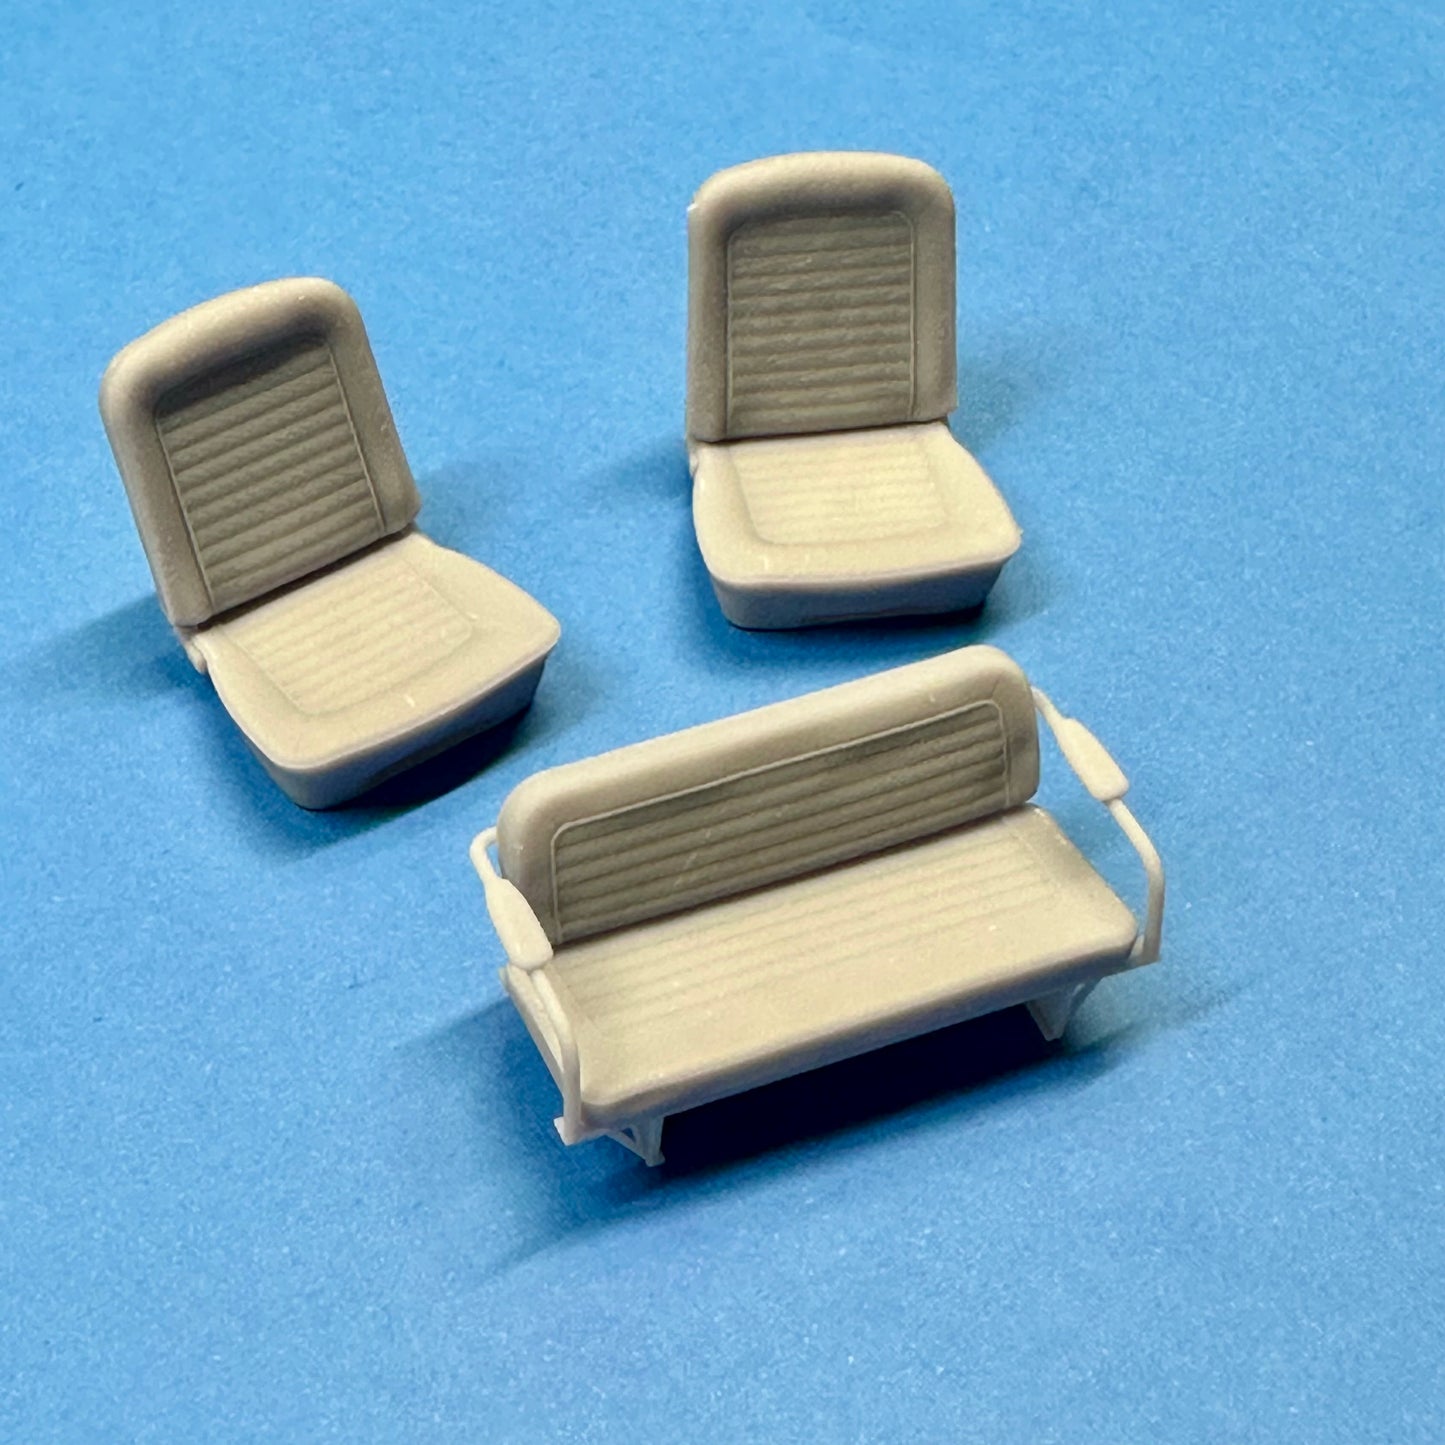 Seats for Bronco Roadster Conversion 1/25